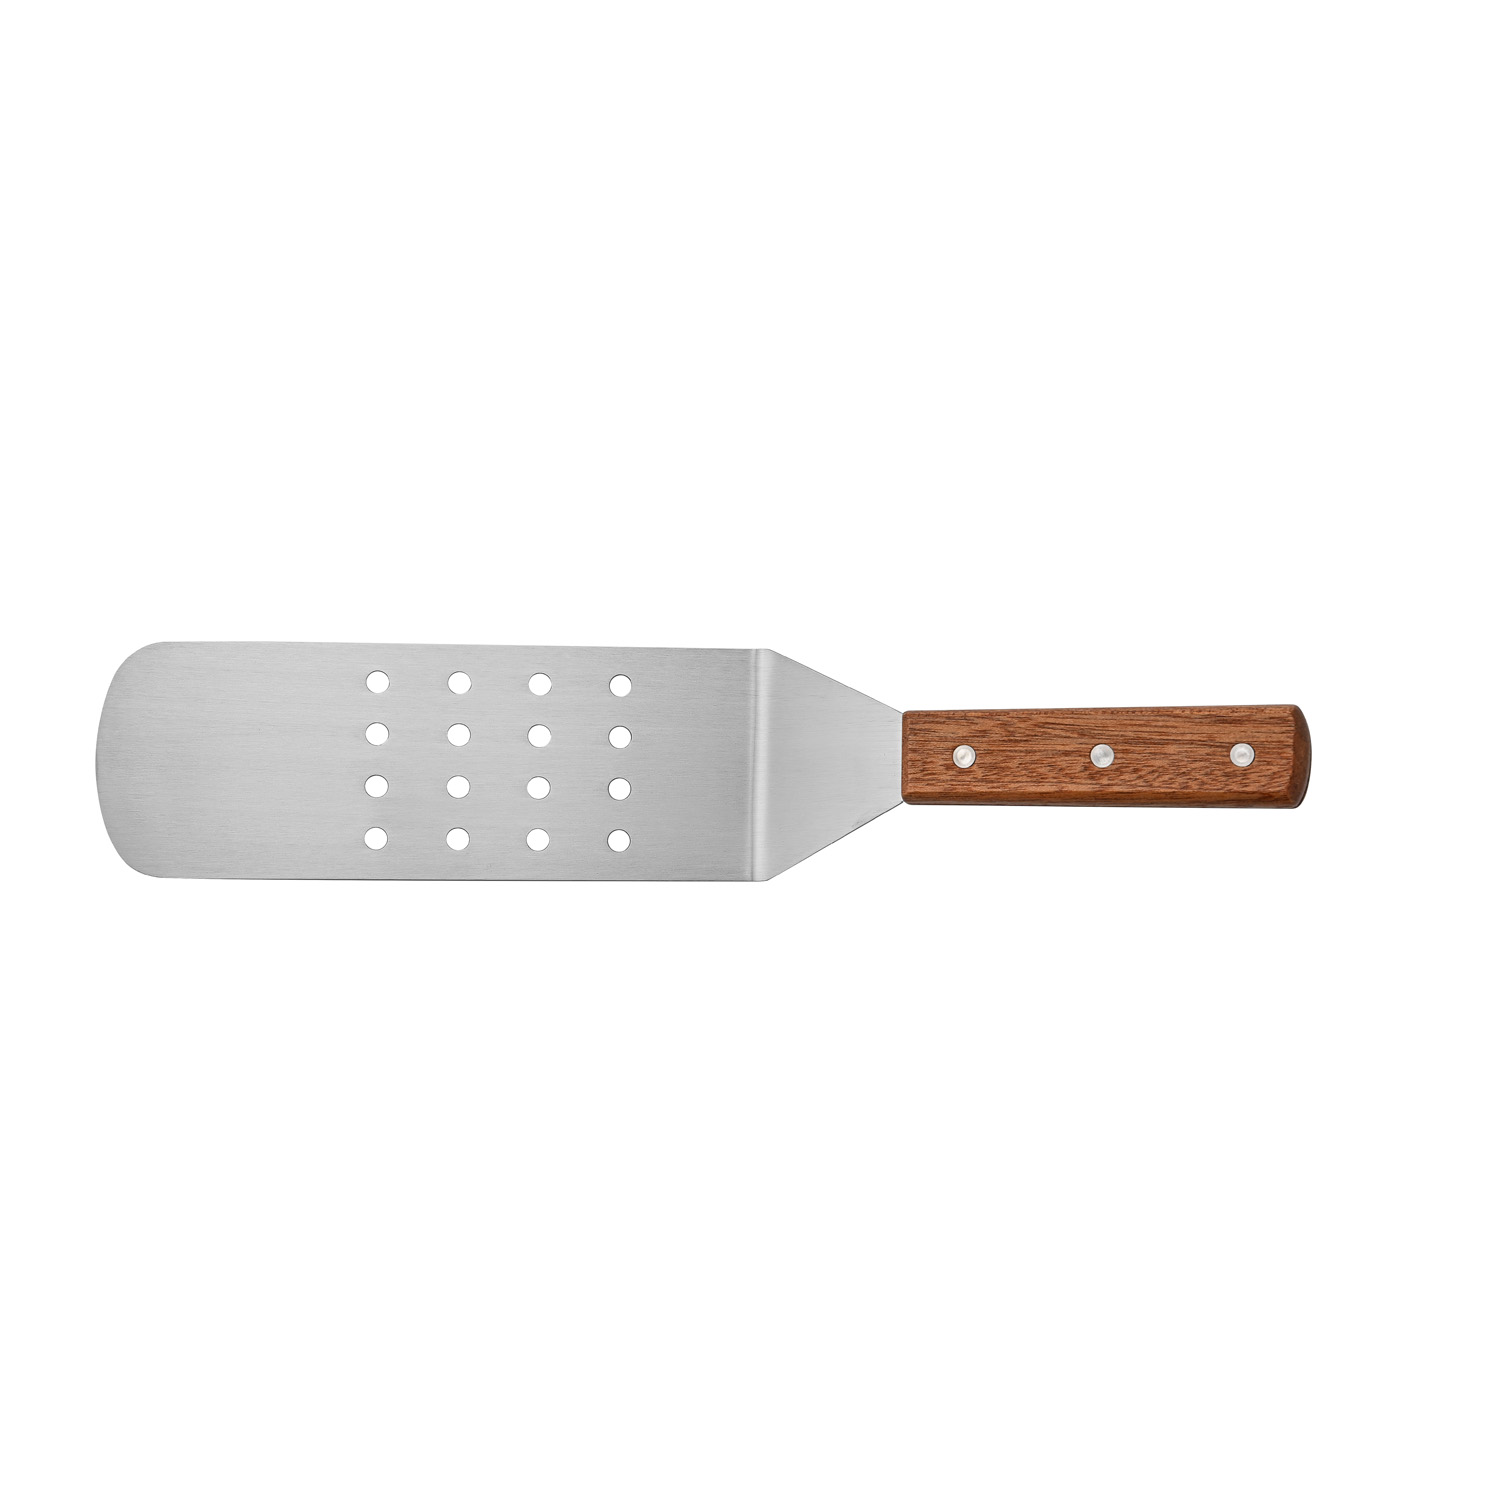 CAC China TNRW-PF83 Stainless Steel Perforated Turner with Wood Handle 8-1/4"